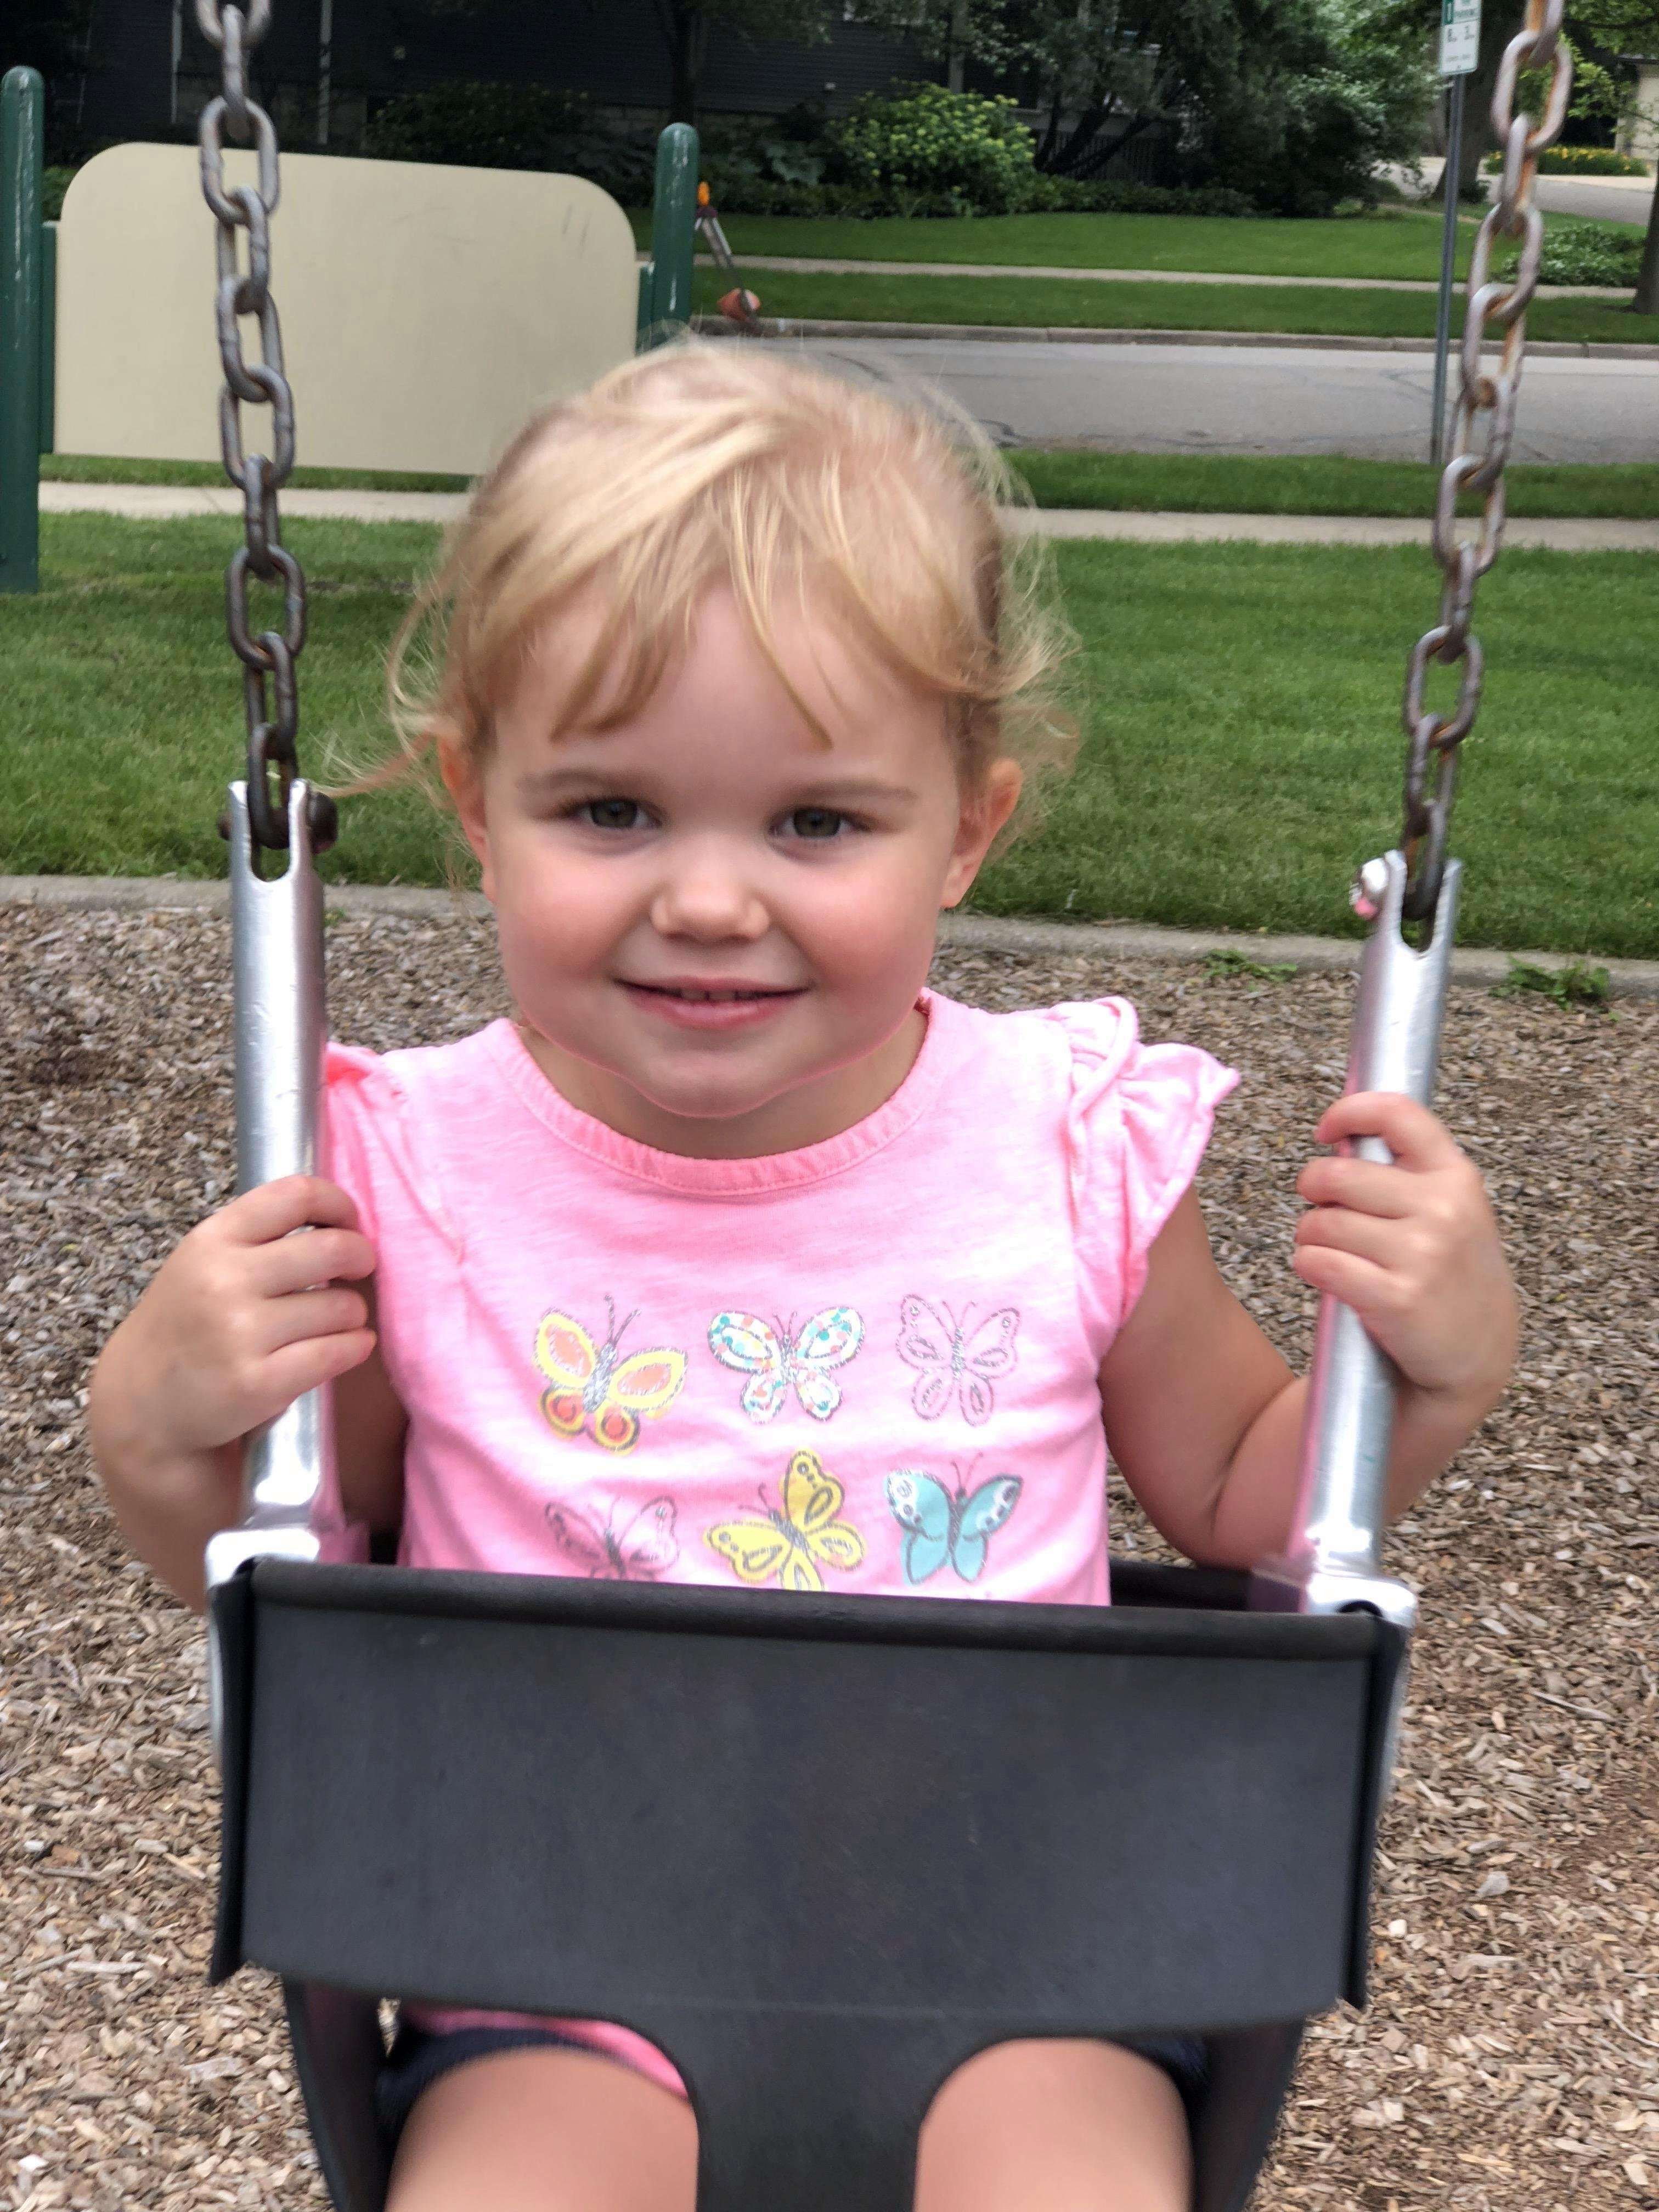  The toddler began suffering seizures and would scream and claw at her own skin